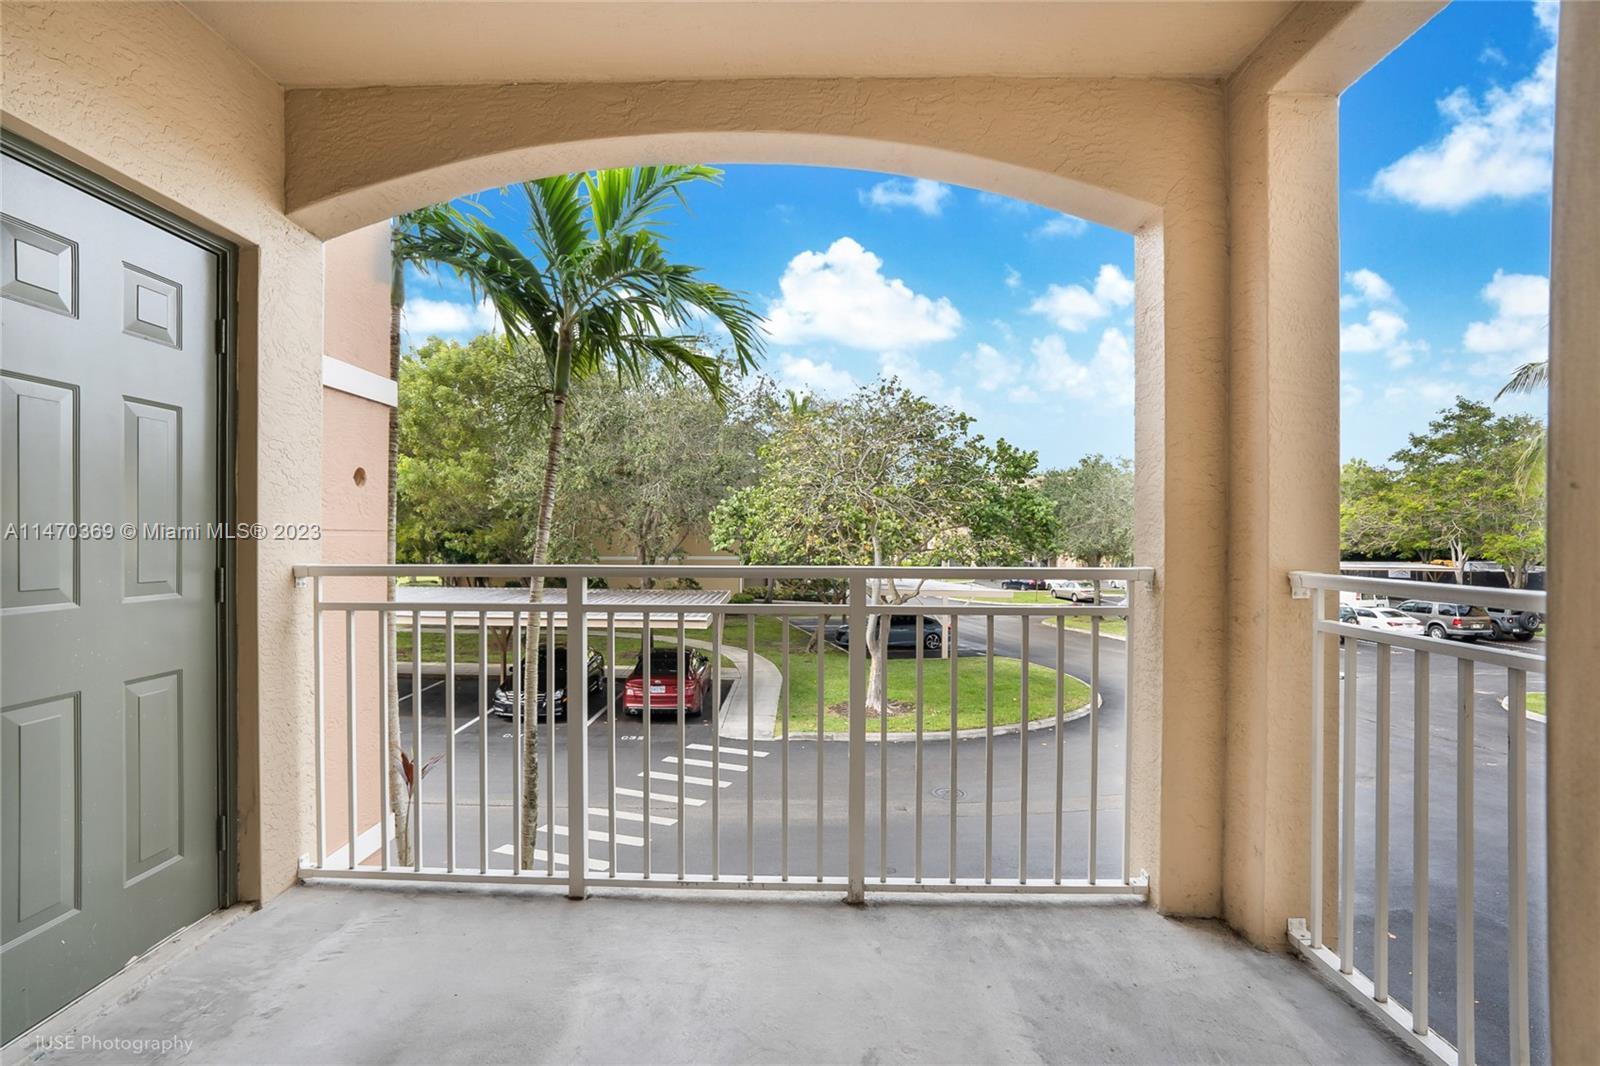 Spacious 3/2 + 1 car garage with large balcony and great views. Granite countertops, stainless steel